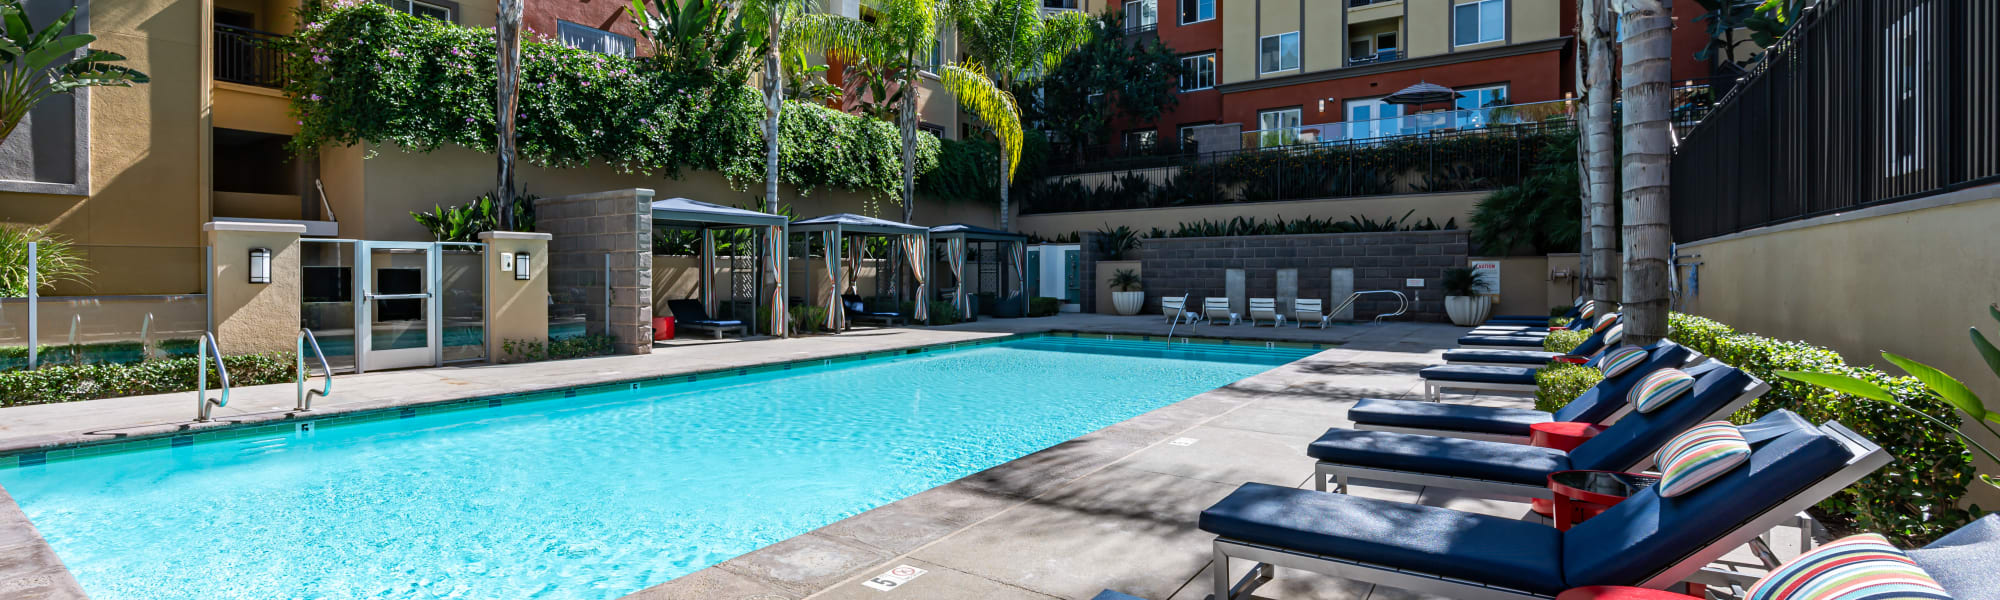 Amenities at The Boulevard Apartment Homes in Woodland Hills, California